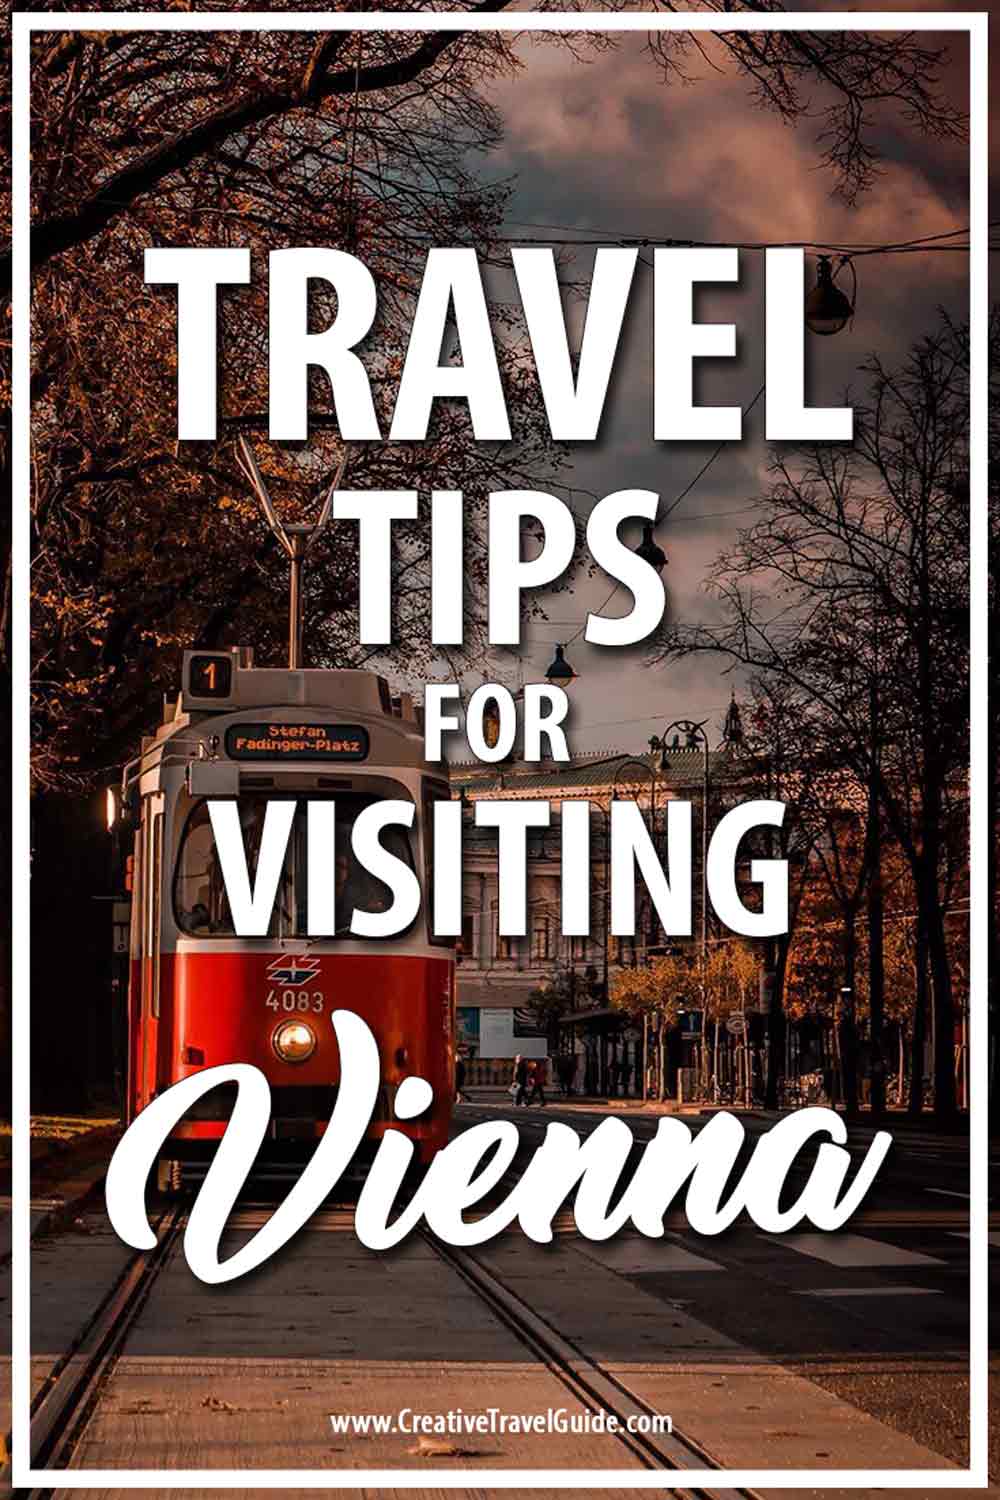 Travel tips for visiting Vienna